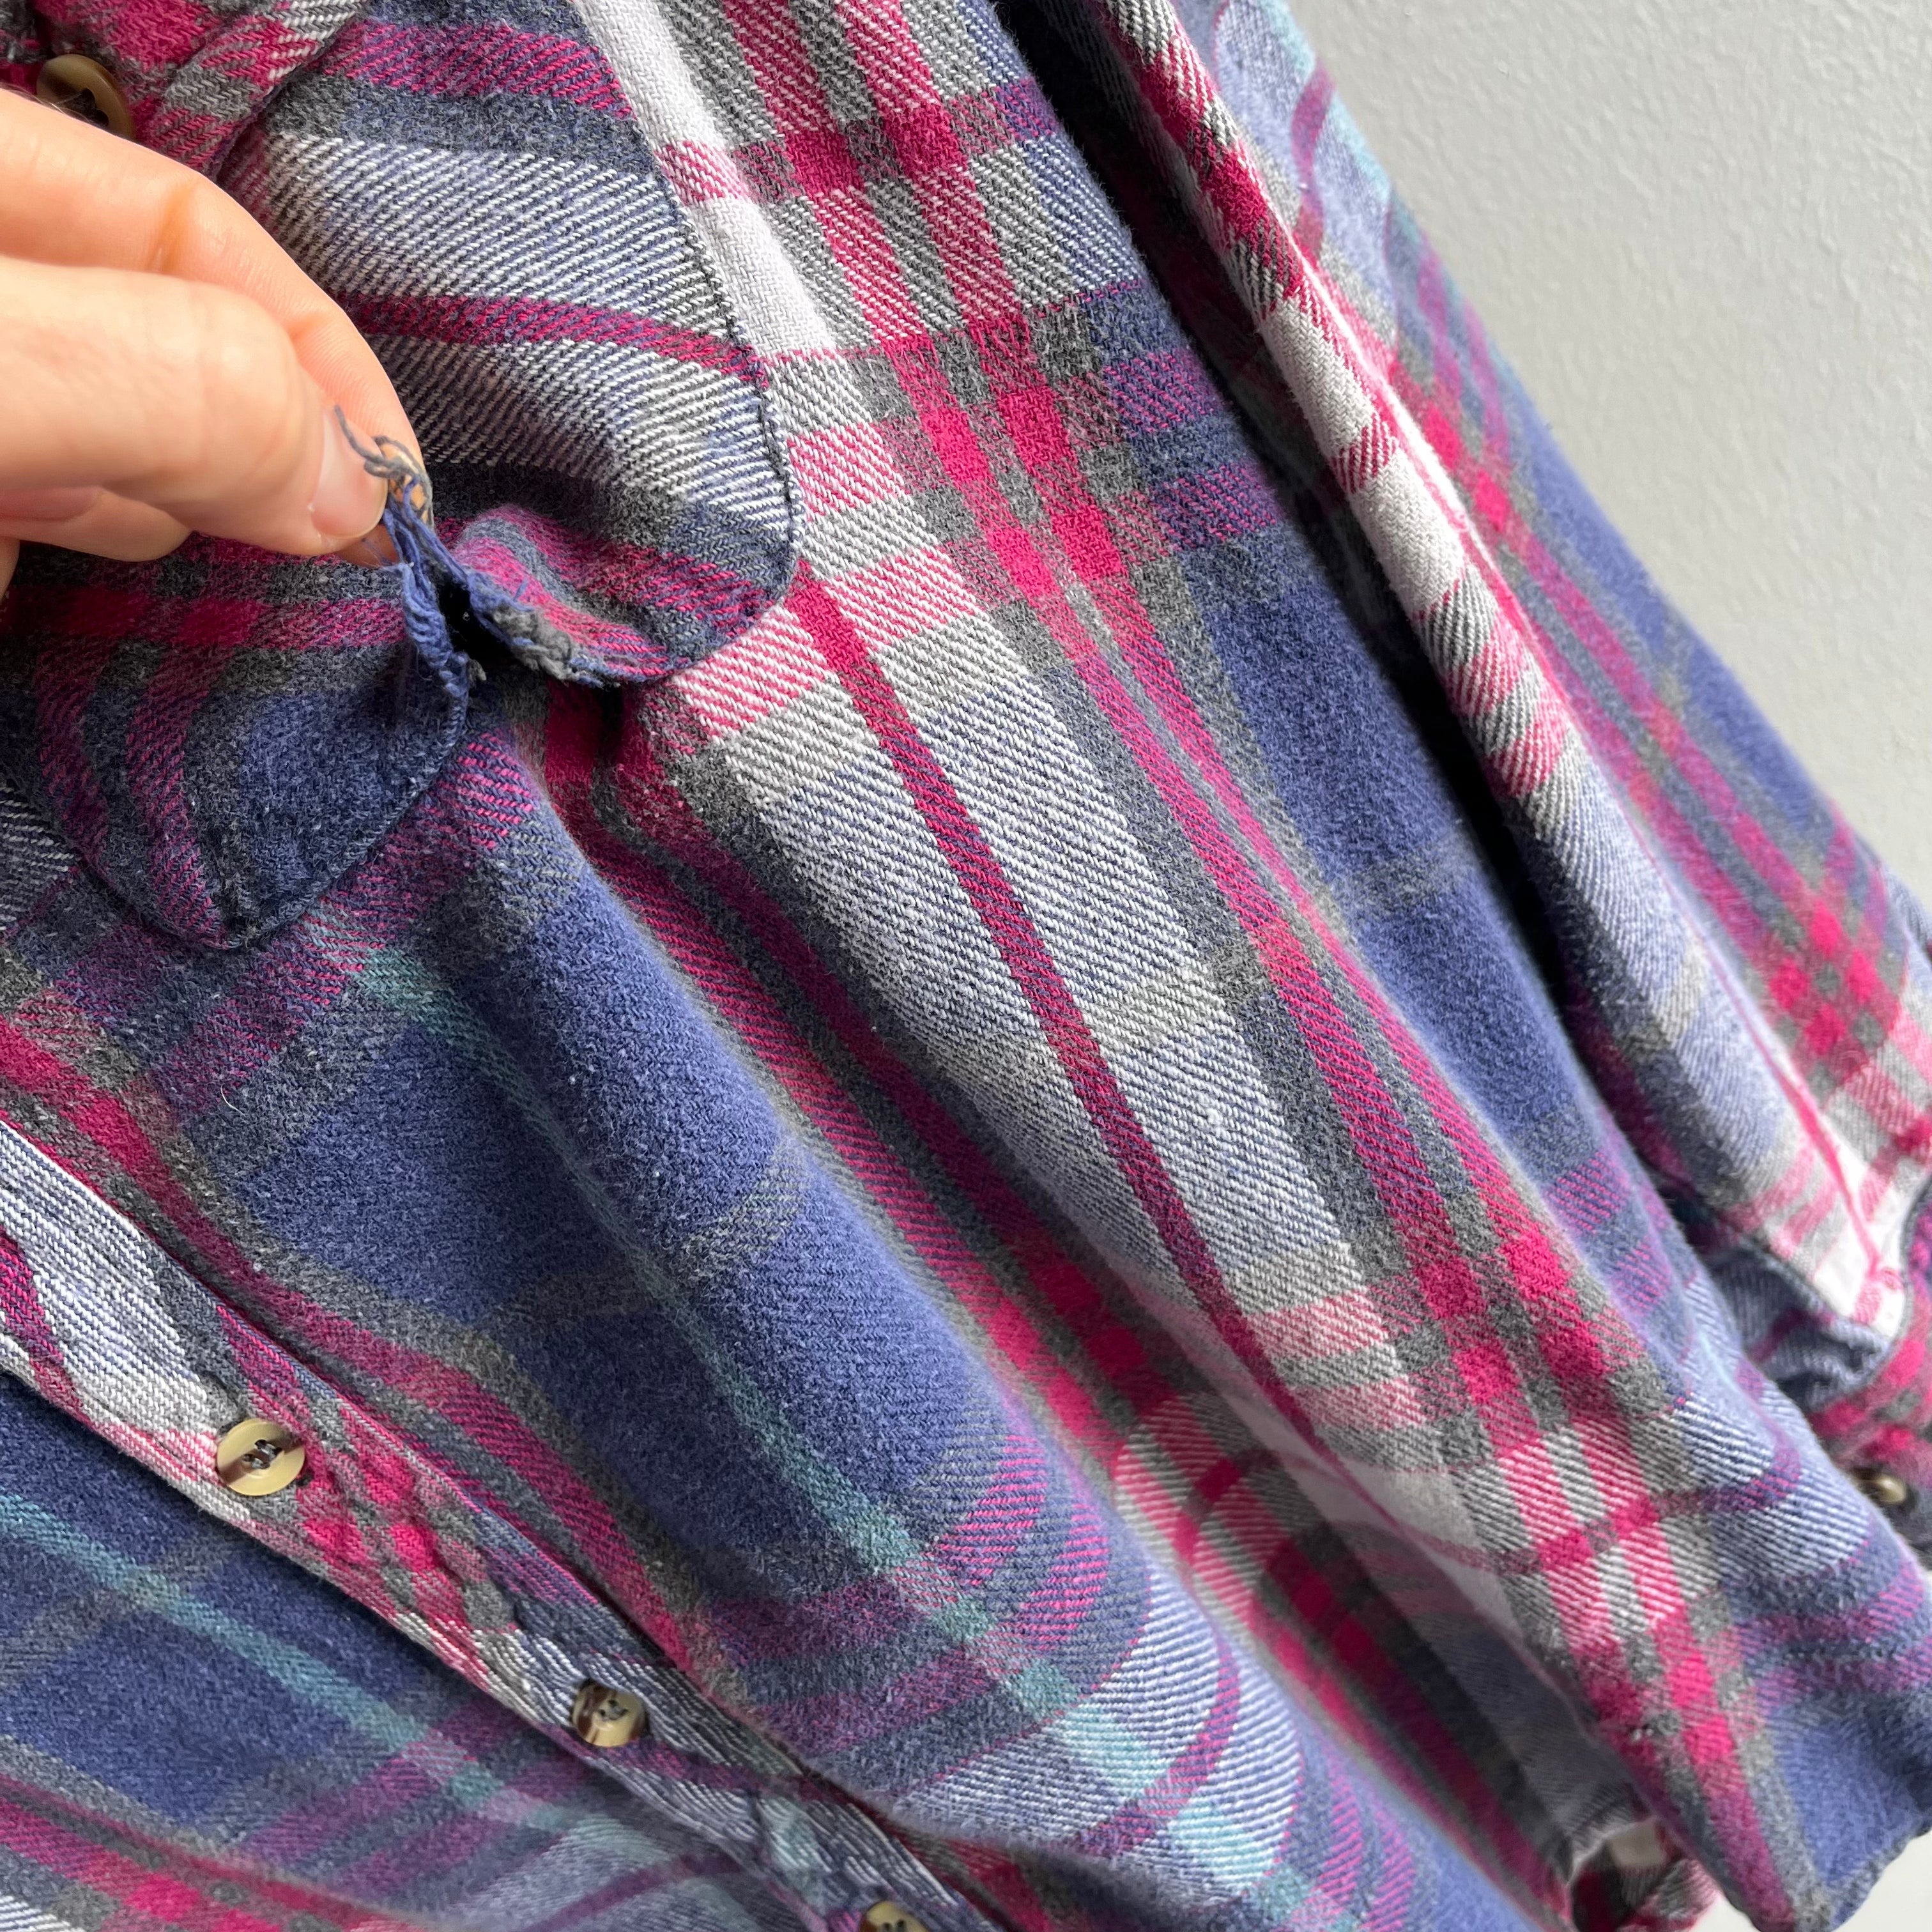 2000s Smaller Pink and Blue Cotton Flannel by Big Yank